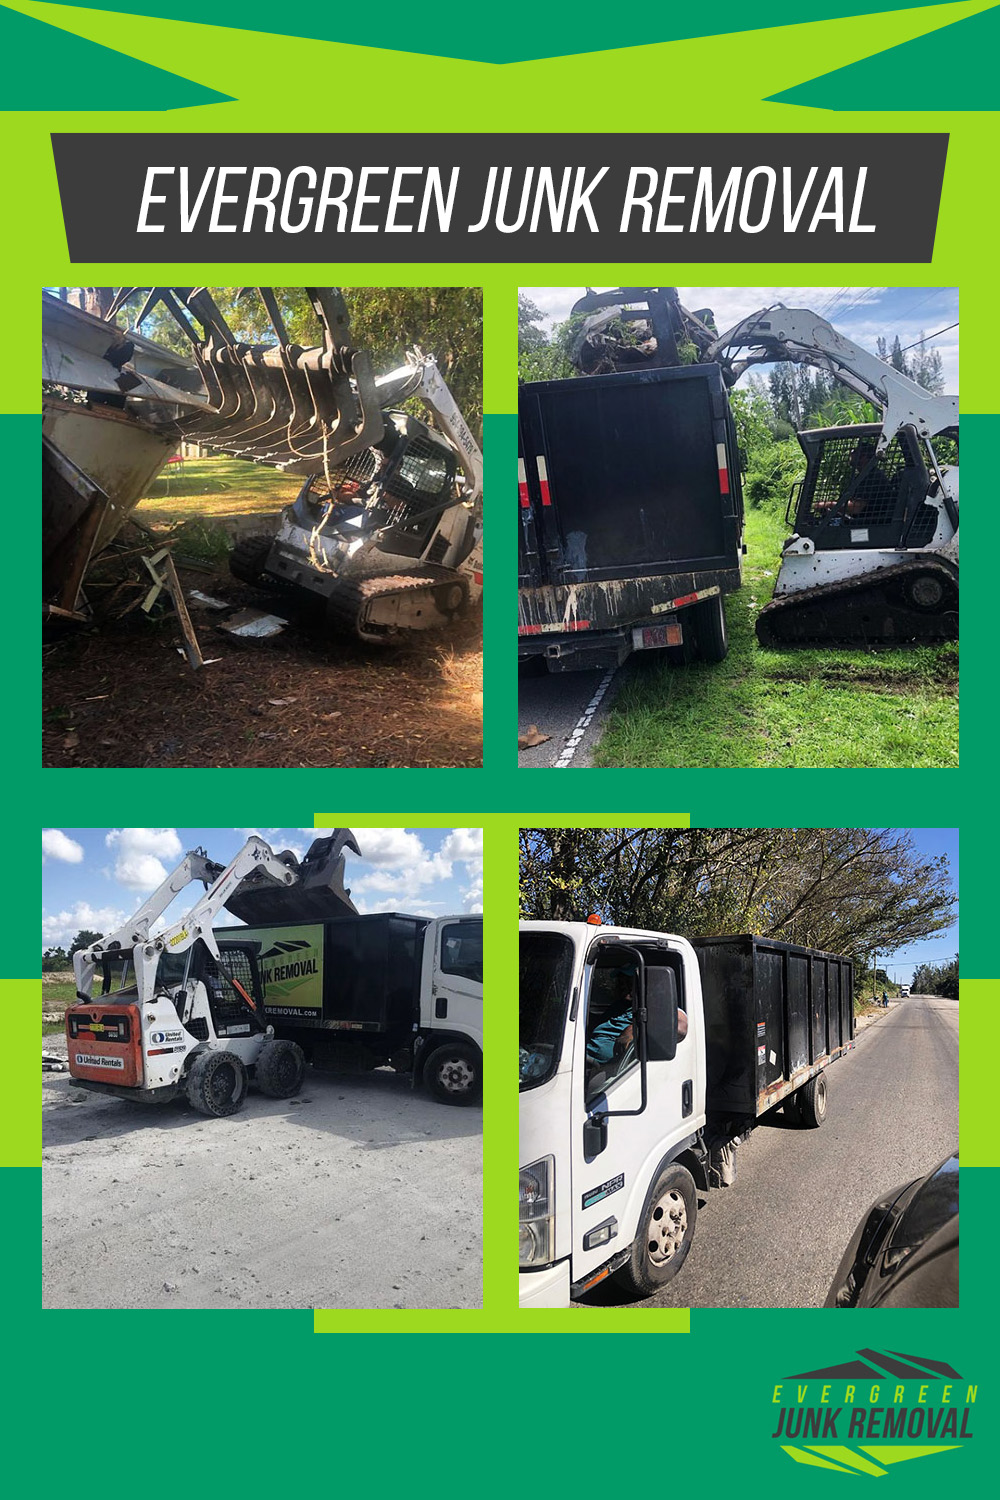 West Palm Beach Junk Removal Service